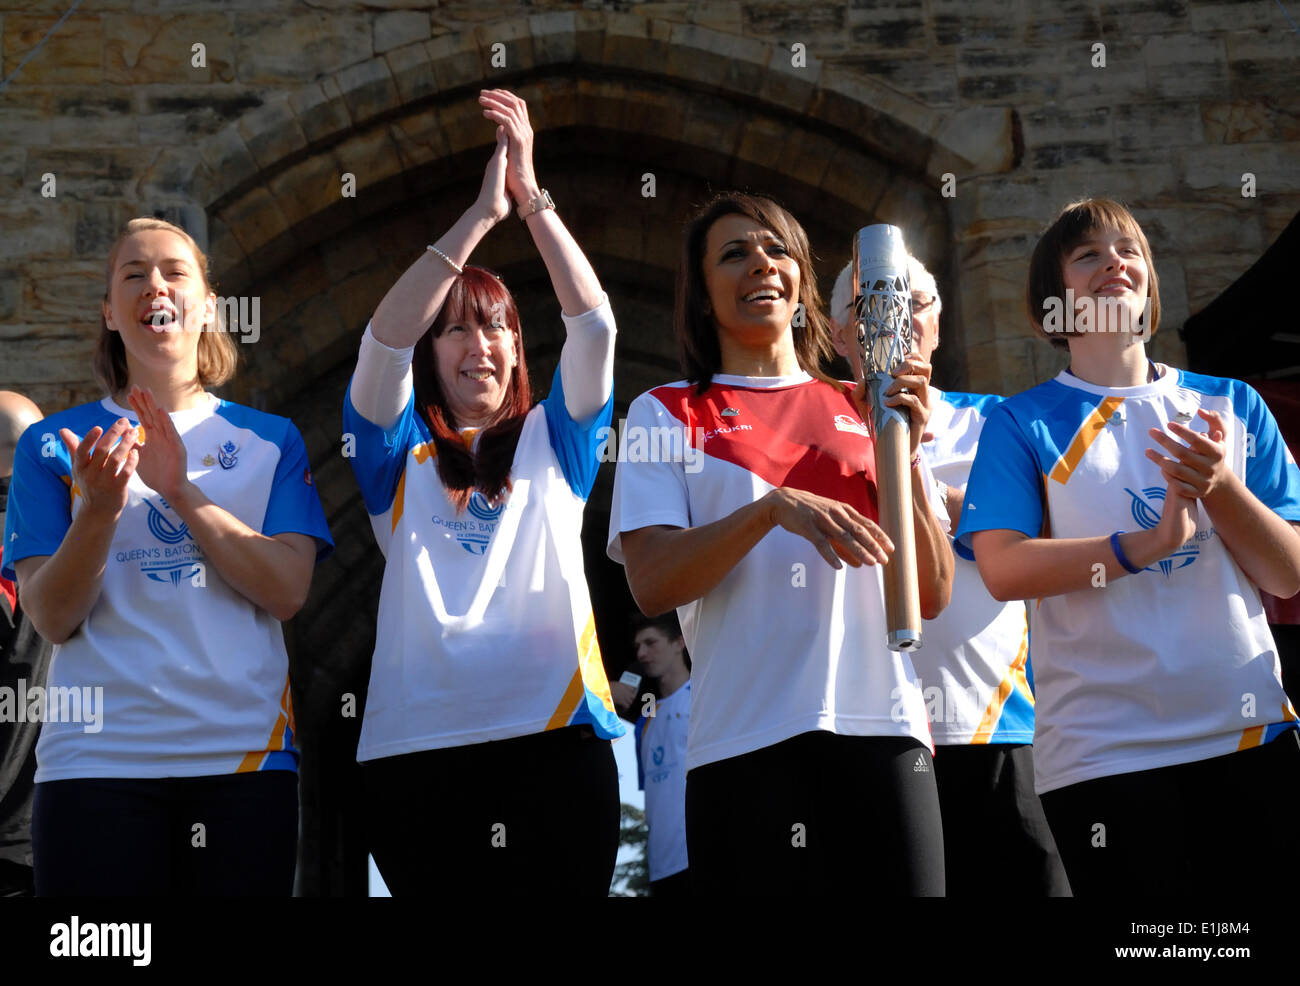 Tonbridge, Kent, UK. 05th June, 2014. The Queen's Baton Relay reaches Tonbridge in Kent, on its way to the Commonwealth Games in Glasgow. Lizzy Yarnold, Caz Lorenzo, Dame Kelly Holmes and Millie Knight in Tonbridge Castle Stock Photo